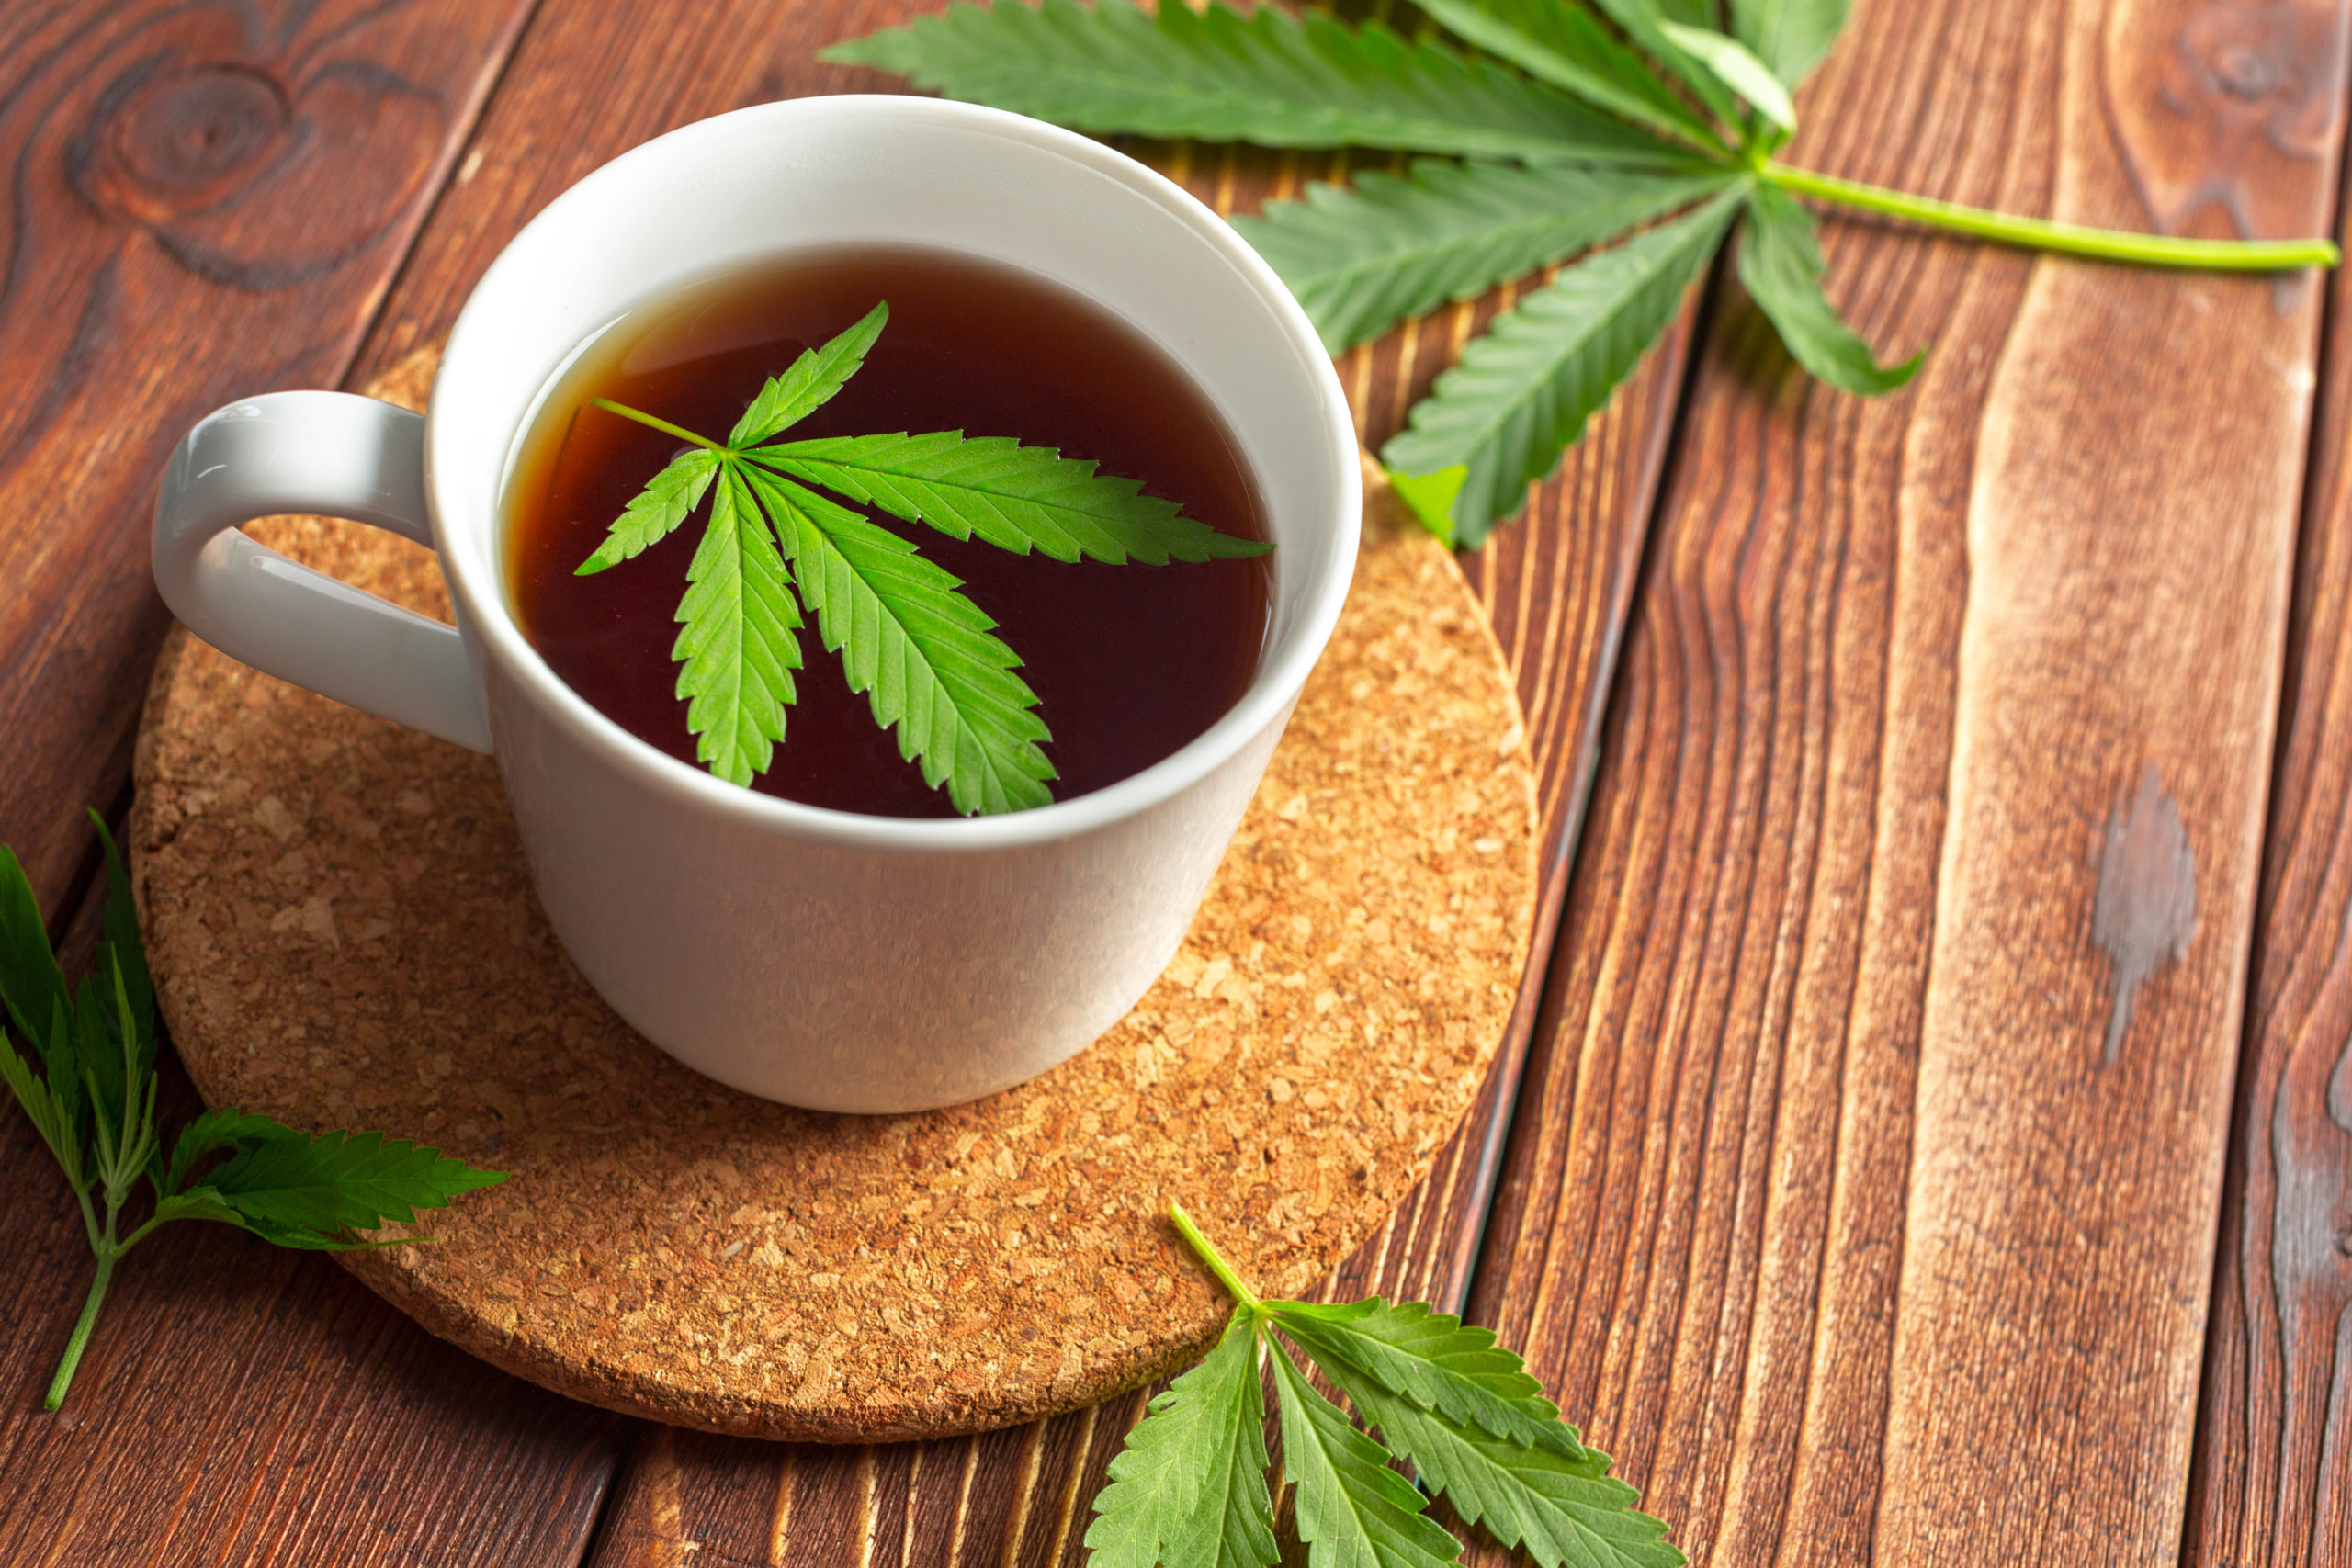 What Are The Medical Benefits Of Drinking Hemp Tea? - CBD Flowers